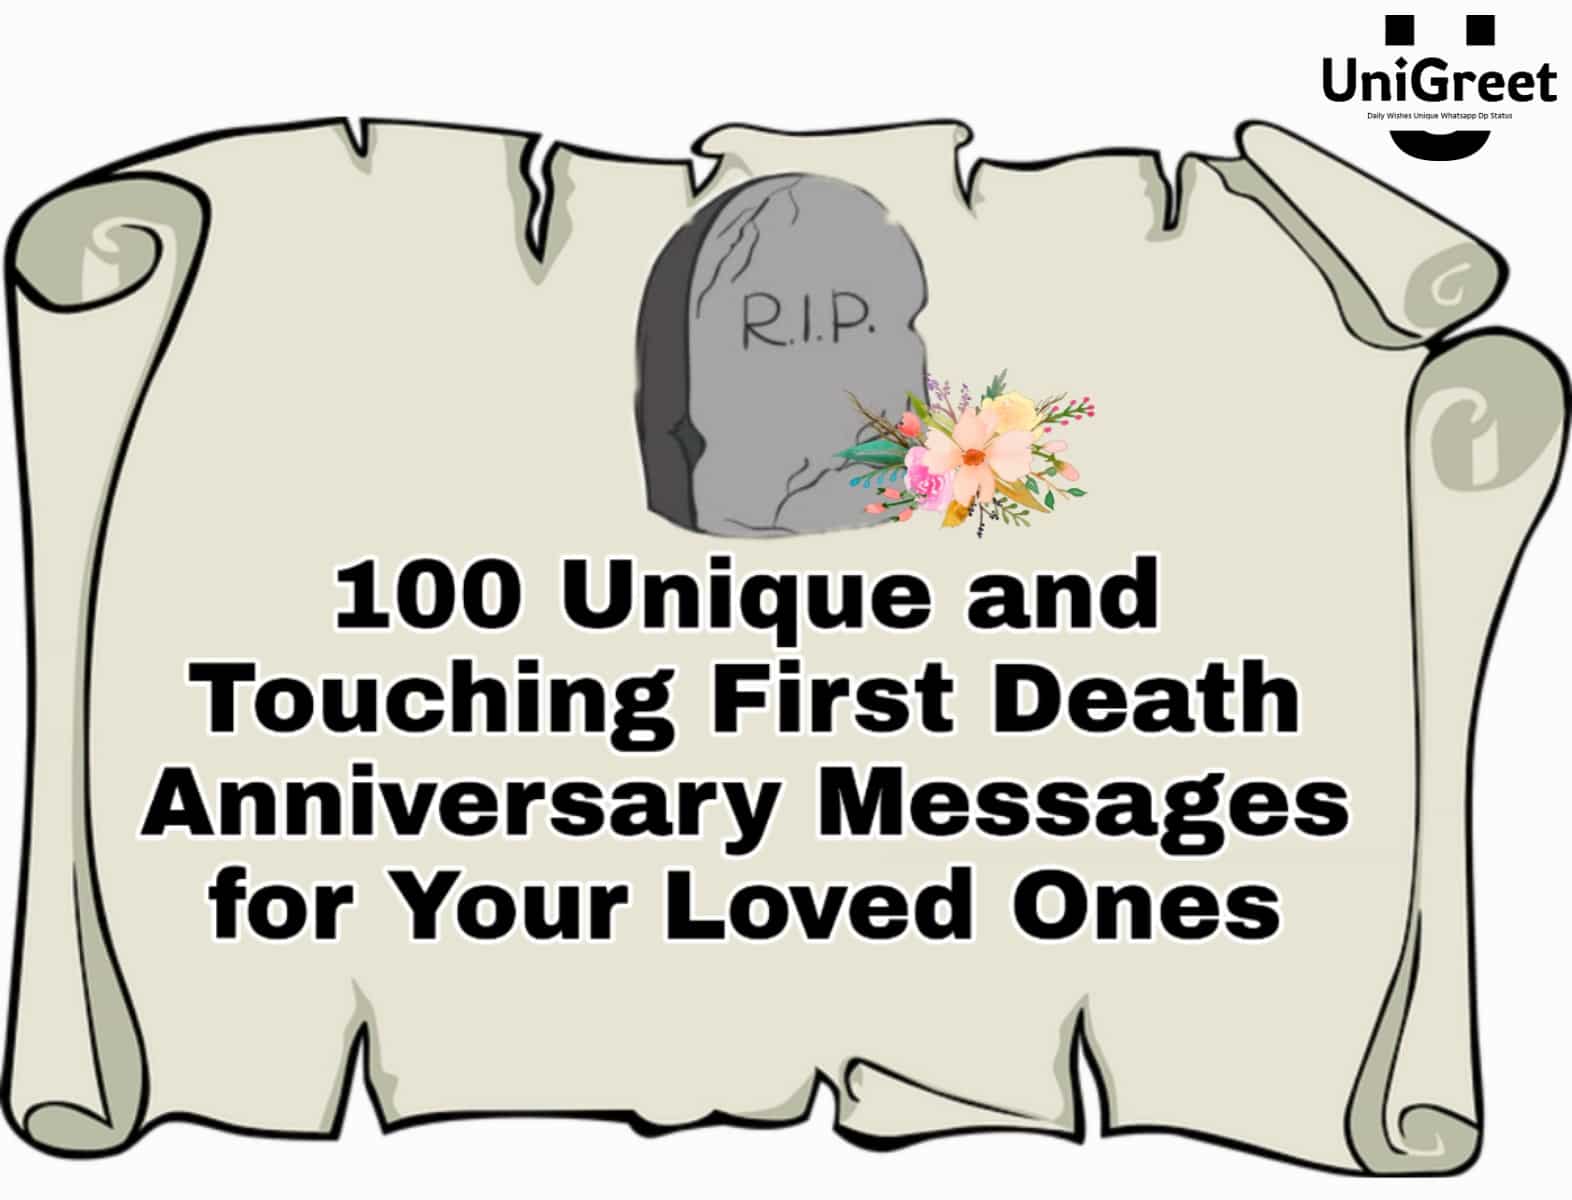 First Death Anniversary Messages for Your Loved Ones